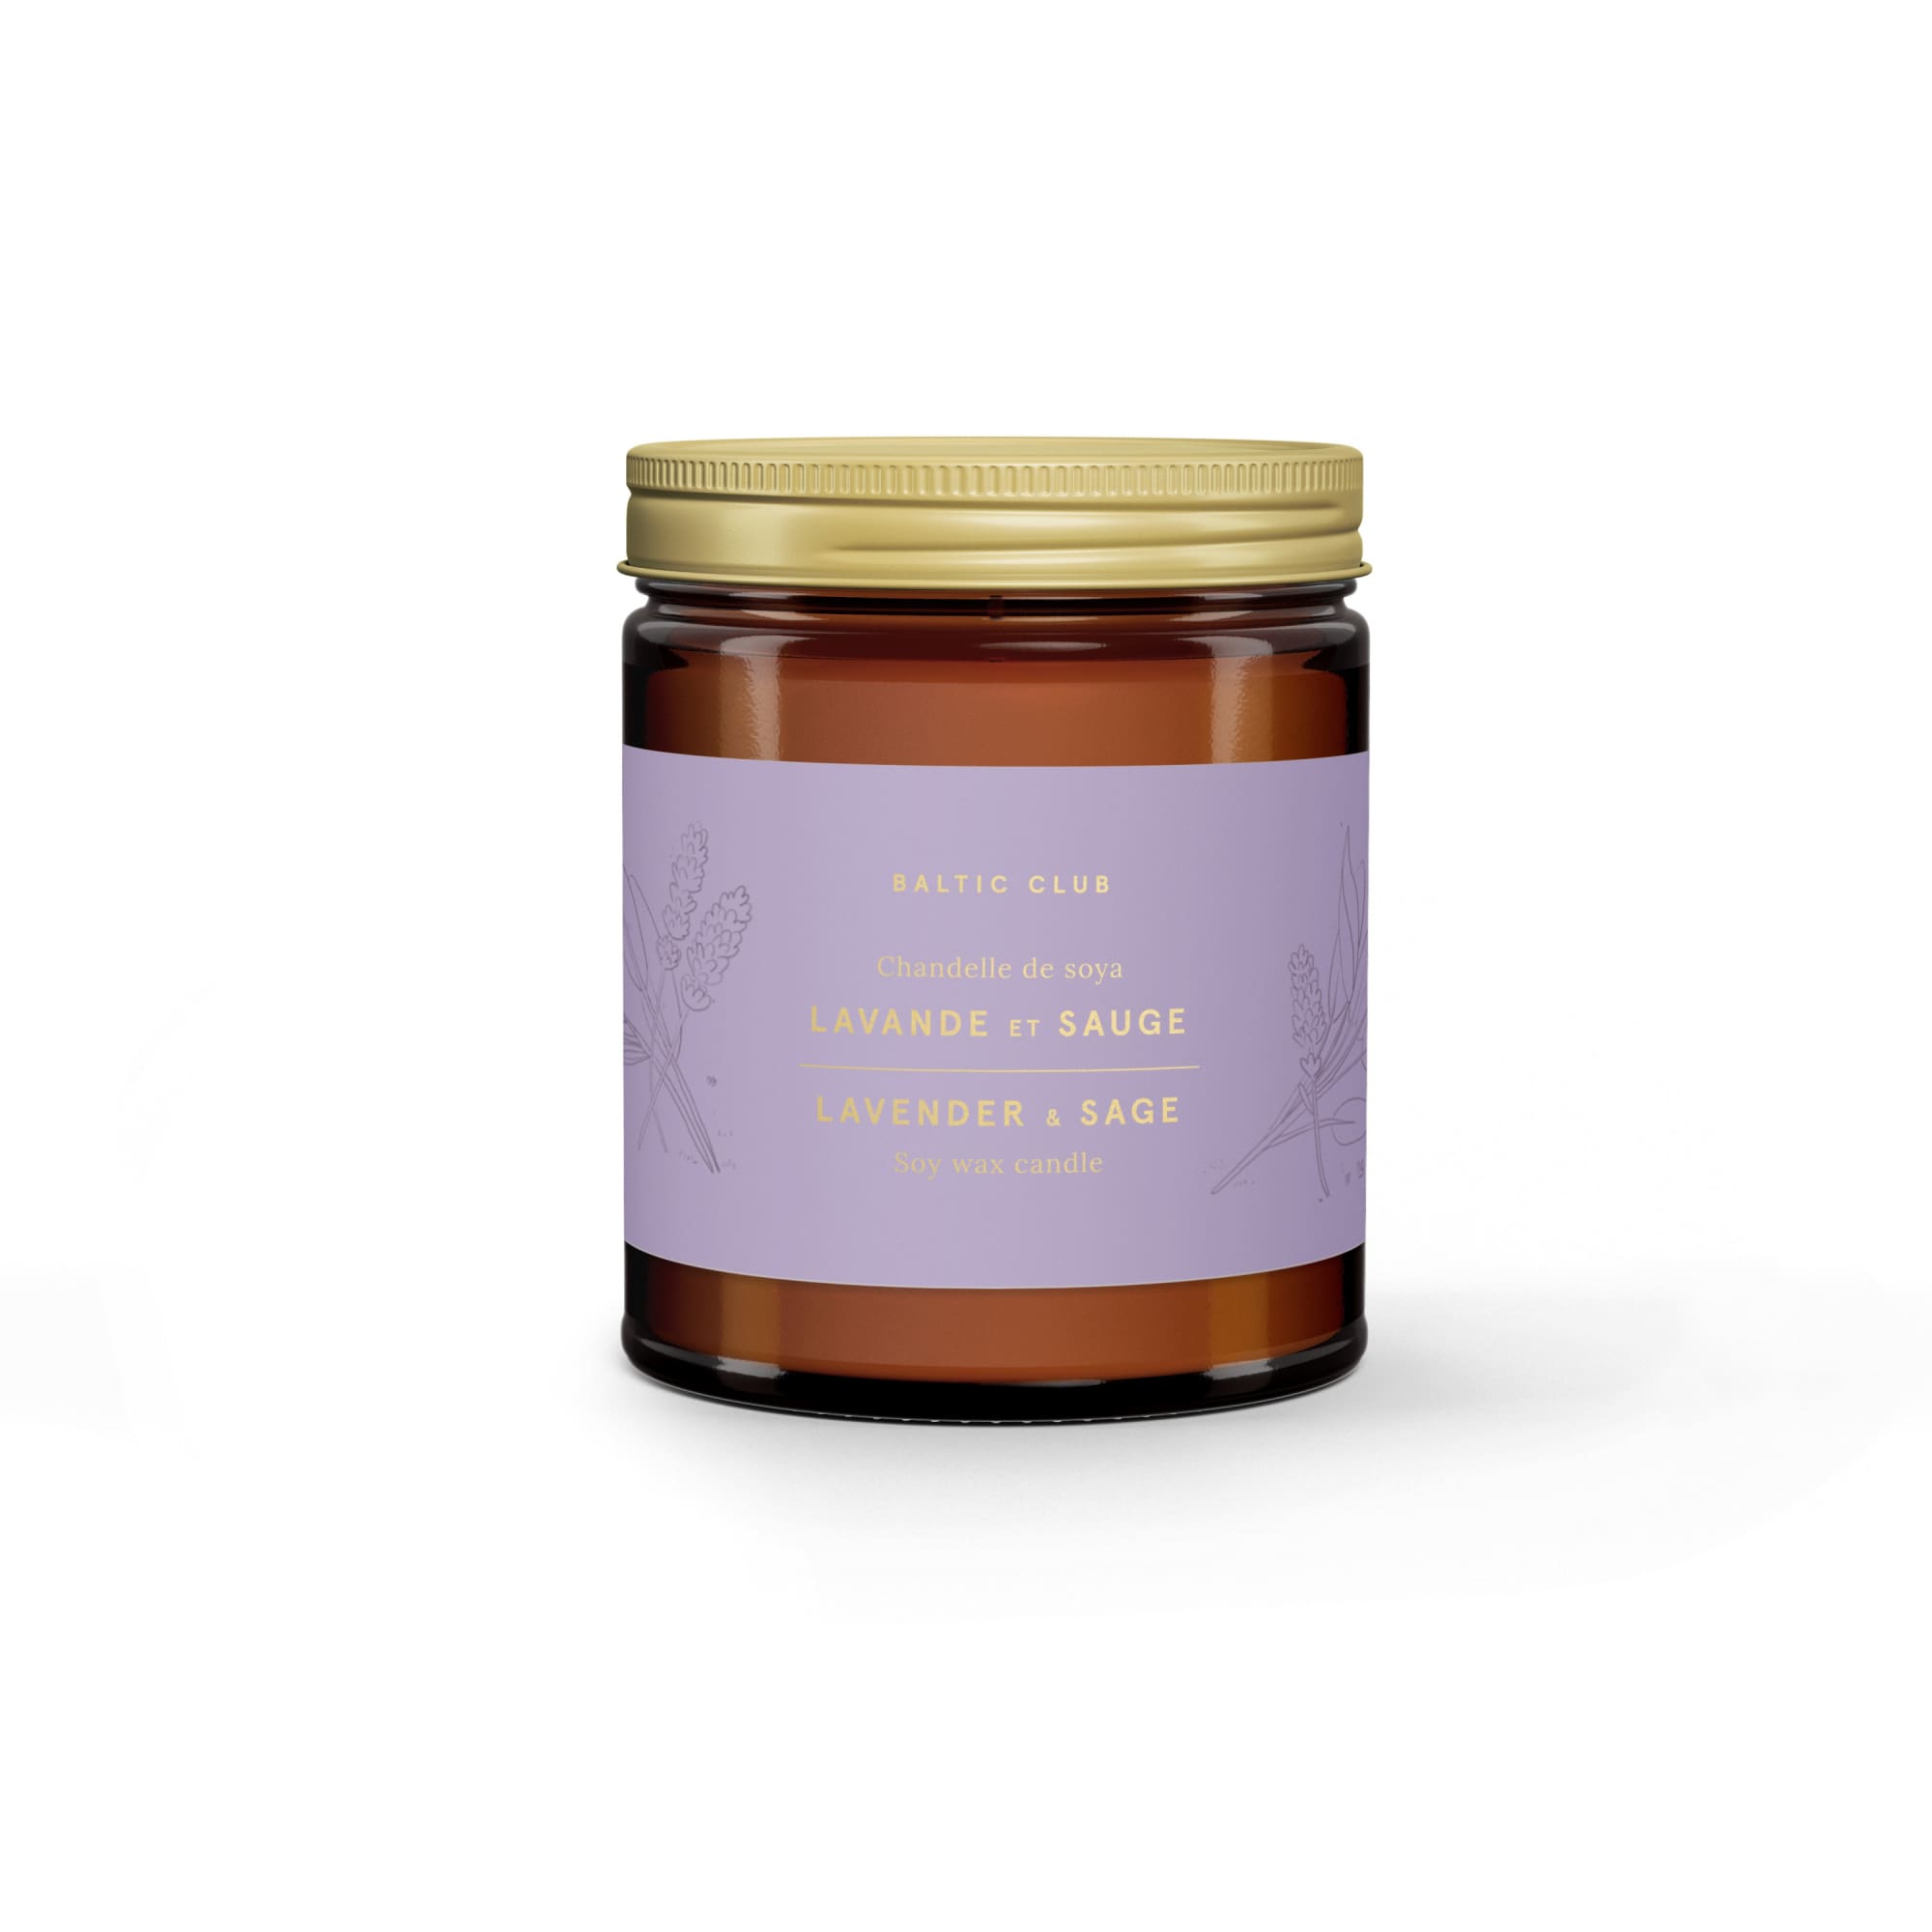 The Baltic Club's Lavender & Sage Soy Candle front with it's gold lid.